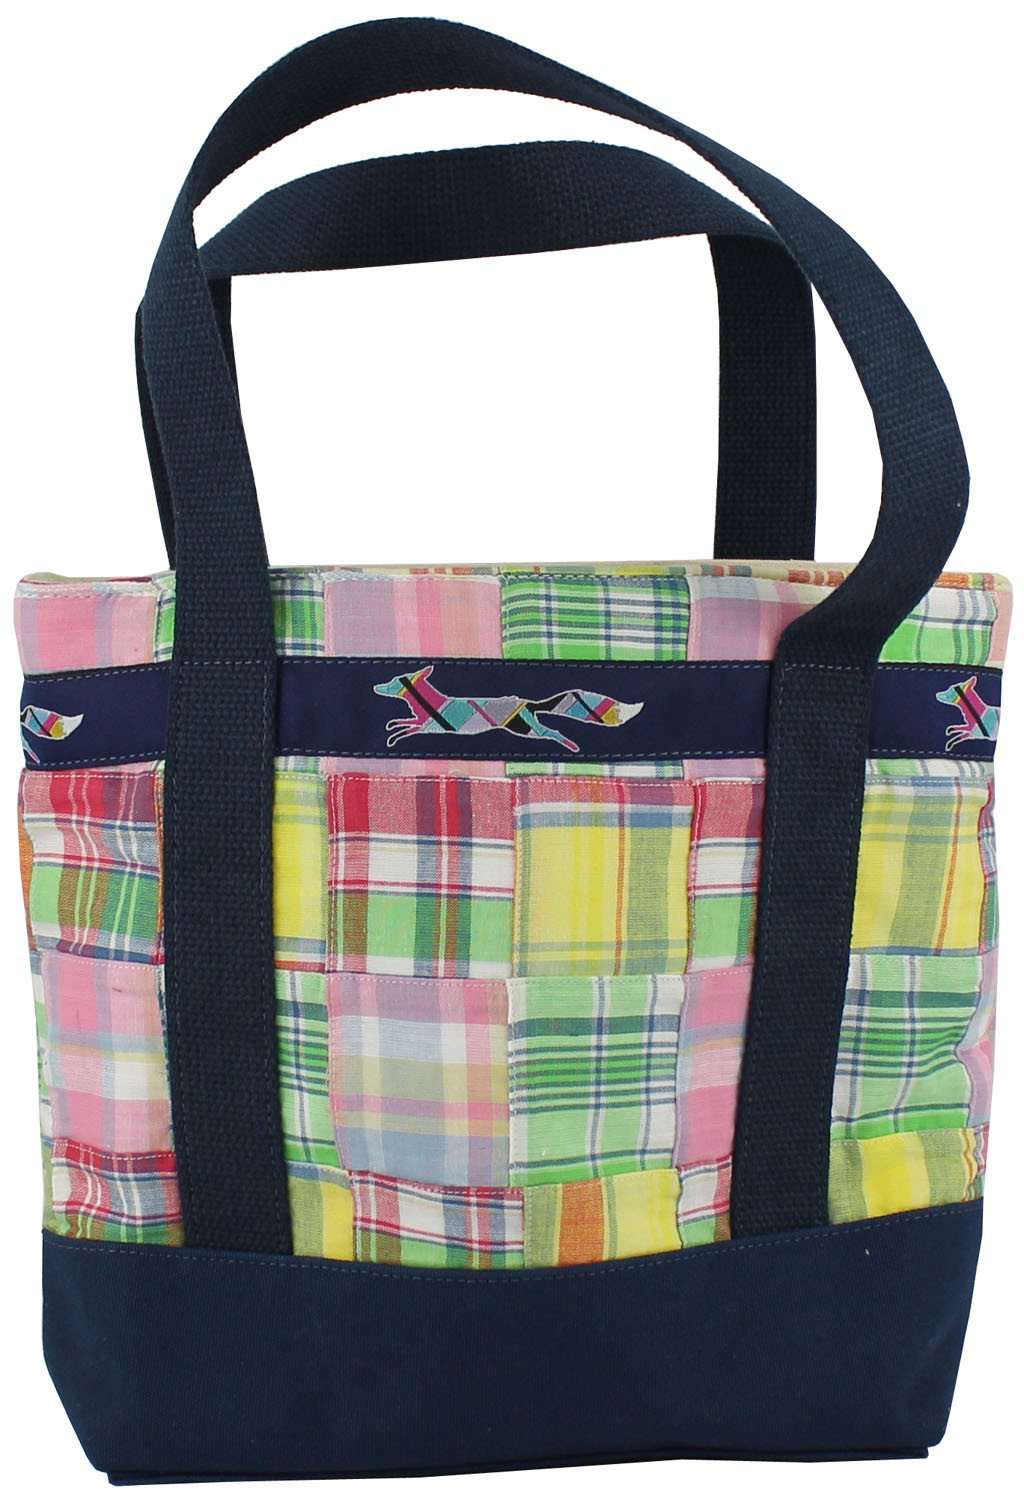 Large Longshanks Tote Bag in Pastel Madras by Country Club Prep - Country Club Prep